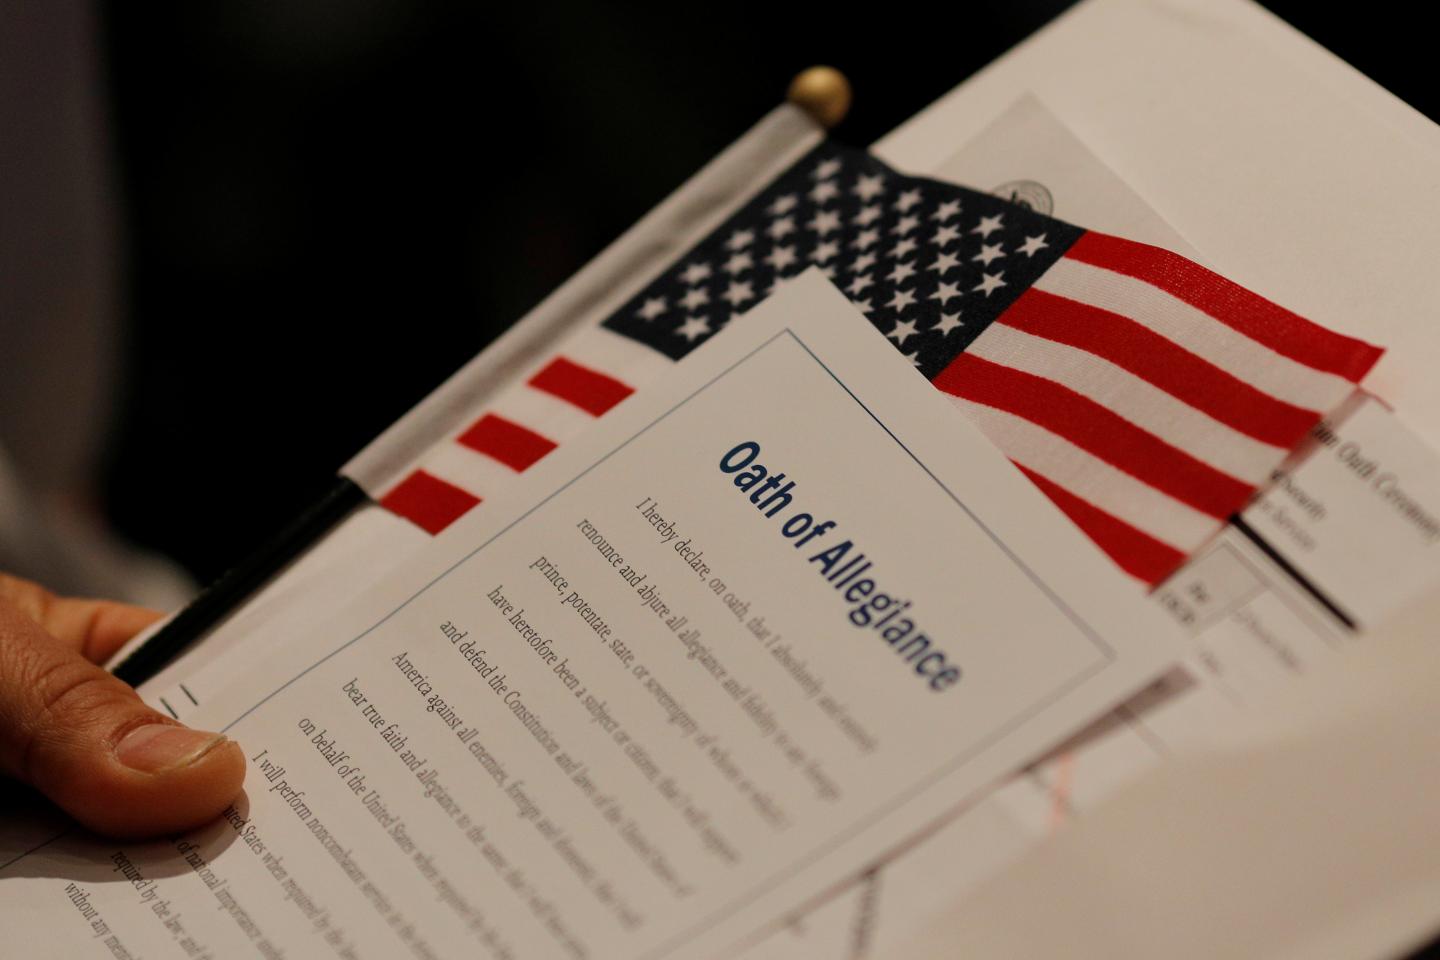 A new United States citizen holds a U.S. flag and a copy of the Oath of Allegiance during a citizenship ceremony at the John F. Kennedy Presidential Library in Boston, Massachusetts, U.S. February 8, 2017. REUTERS